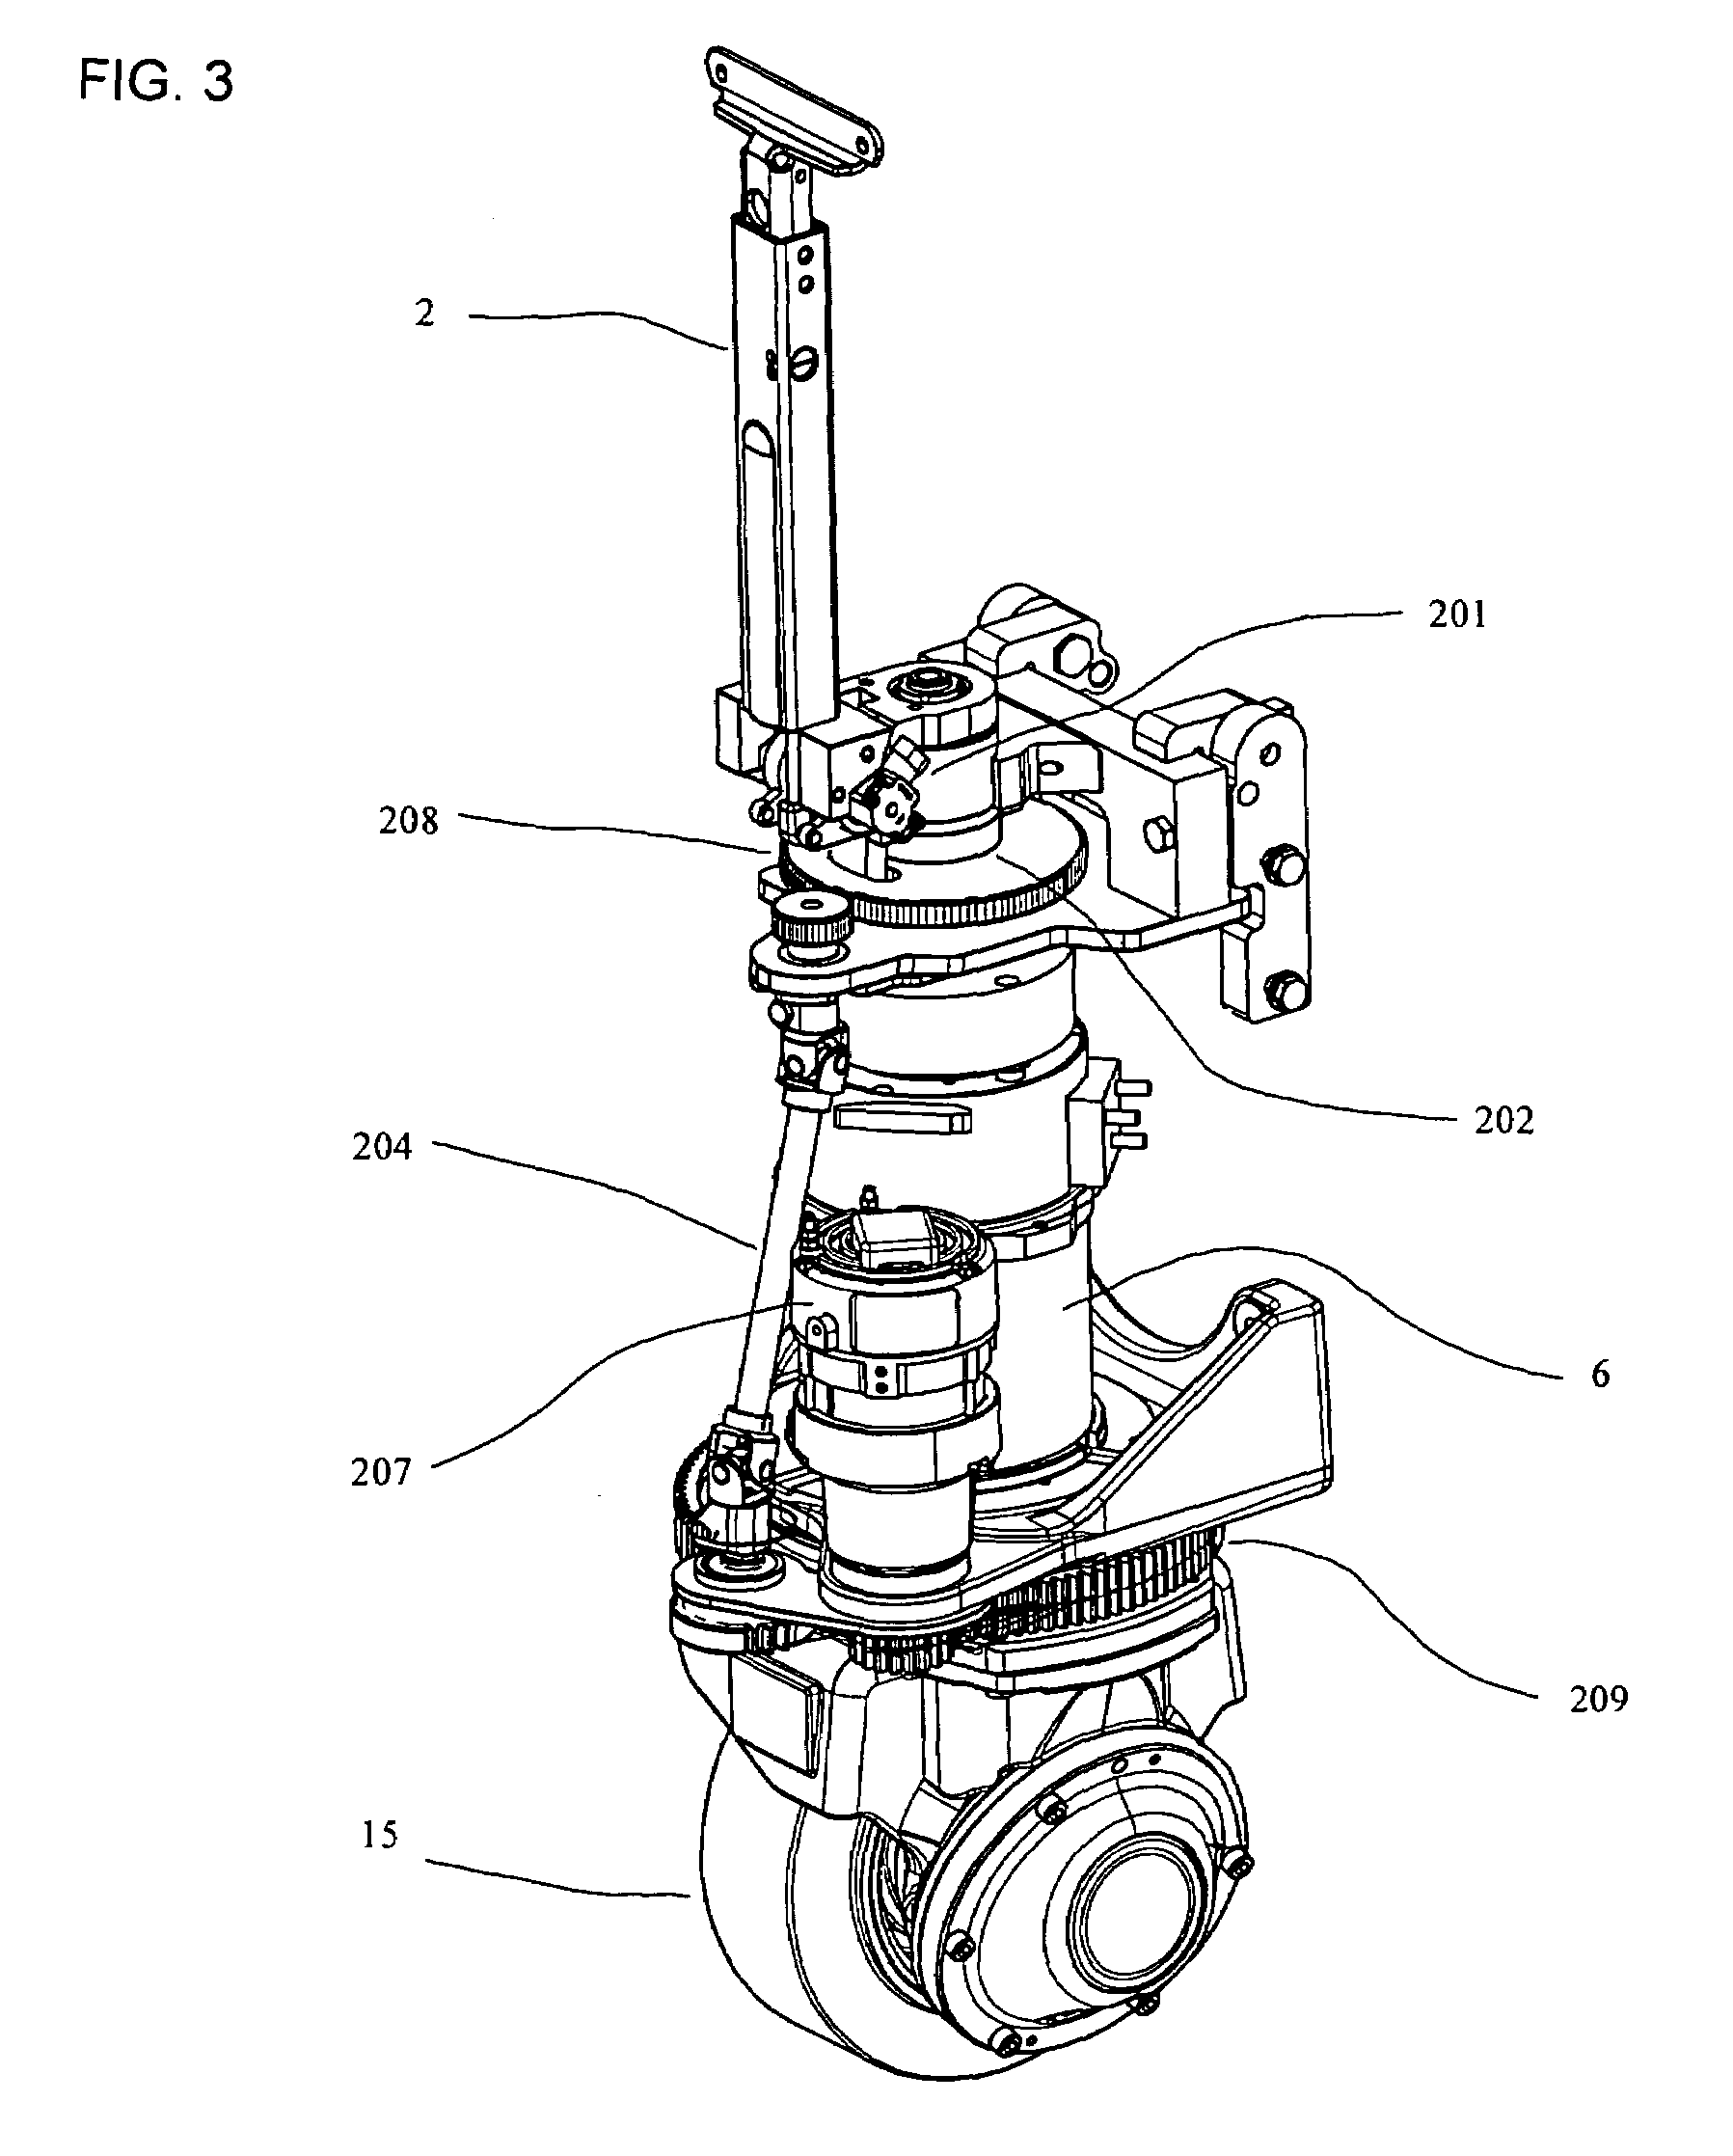 Power assisted steering for motorized pallet truck